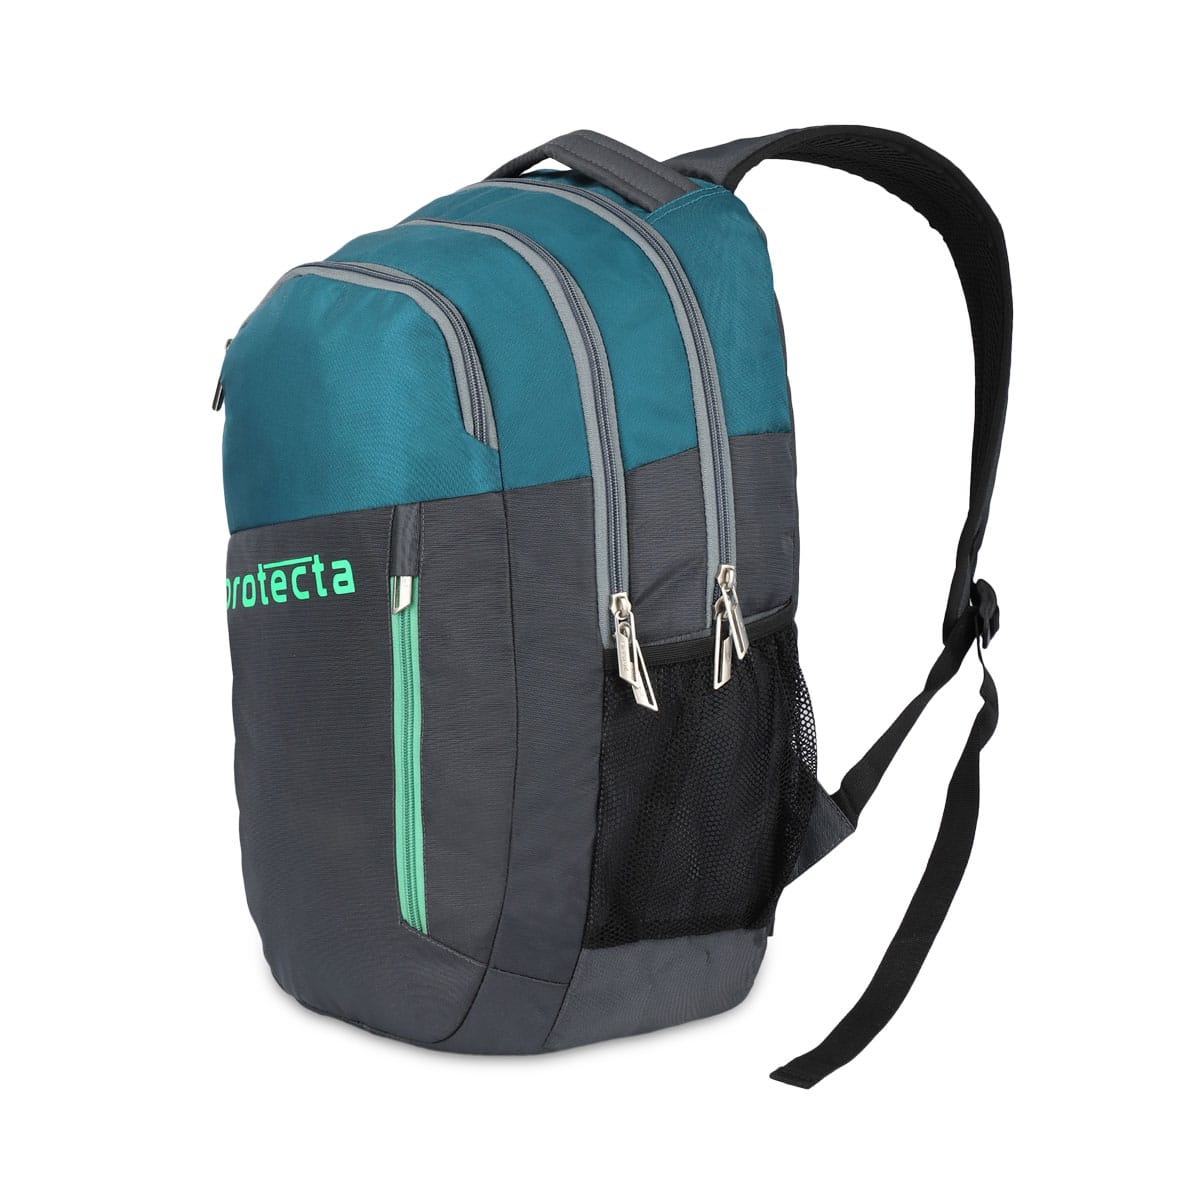 Grey-Astral| Protecta Twister Laptop Backpack-Main